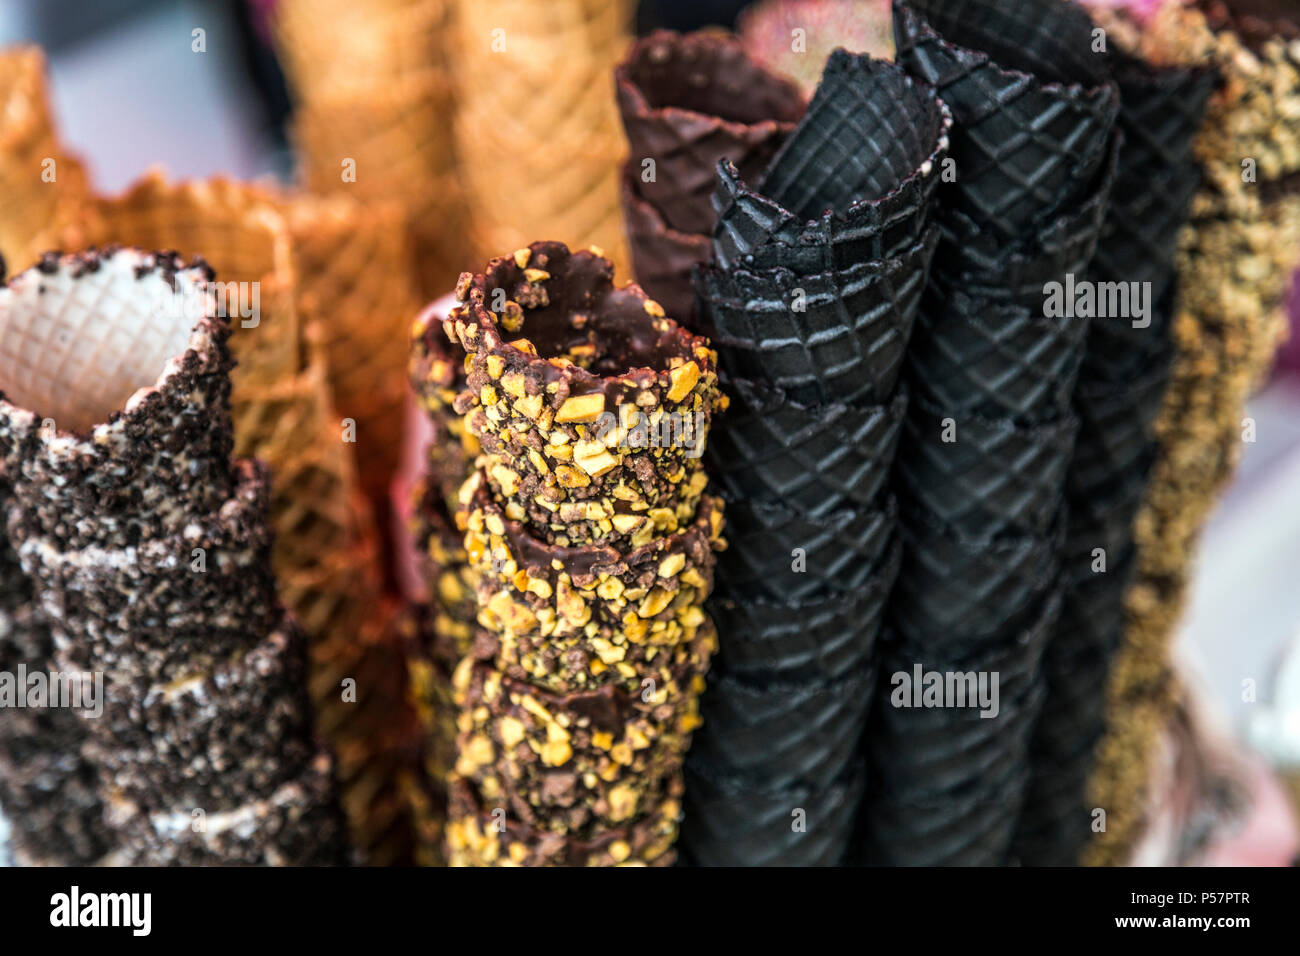 A selection of ice cream cones at a food market (Greenwich Market, London, UK) Stock Photo